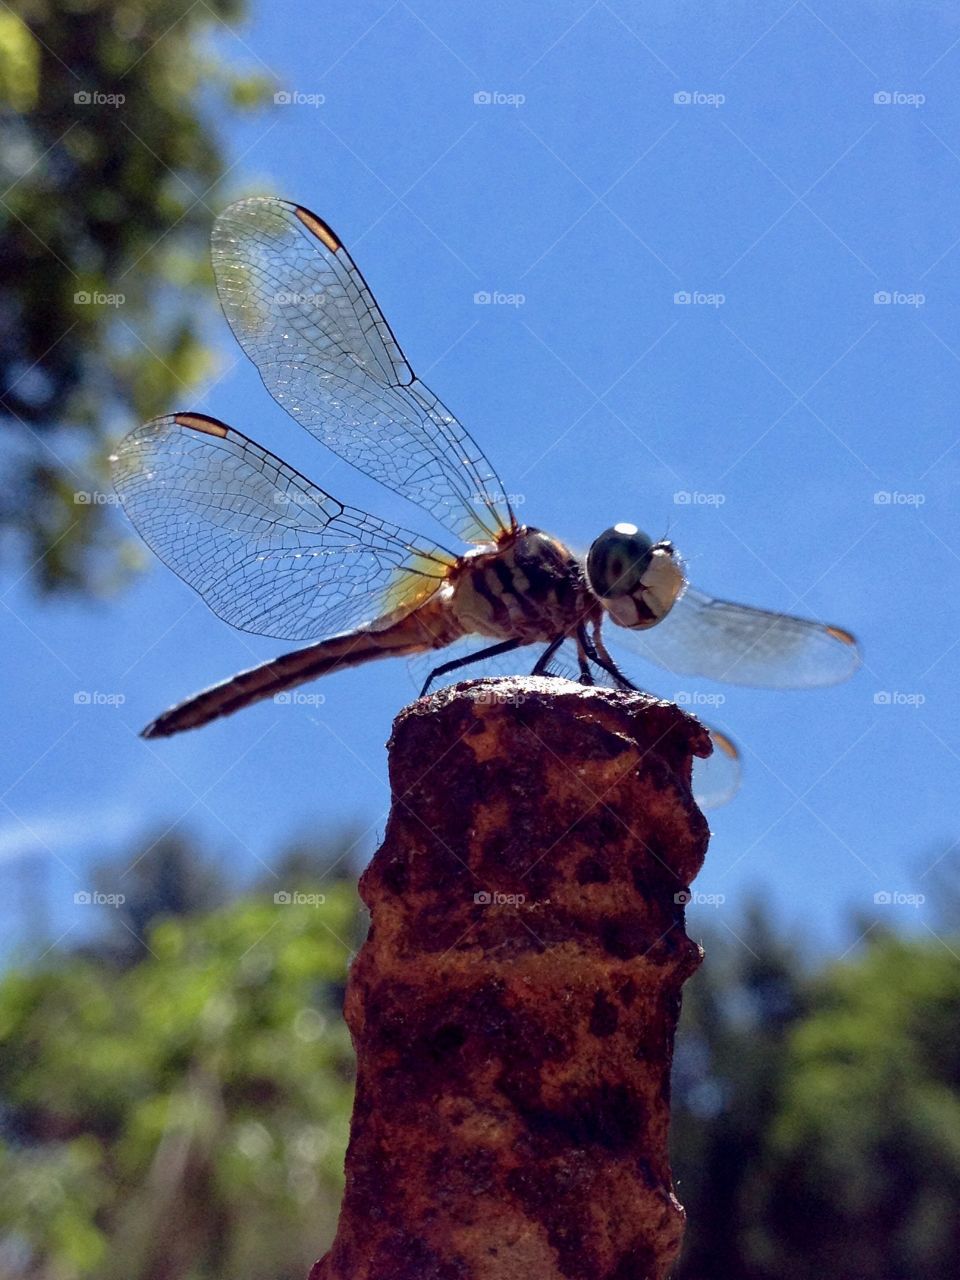 Dragonfly from below sitting on rebar, blue sky!